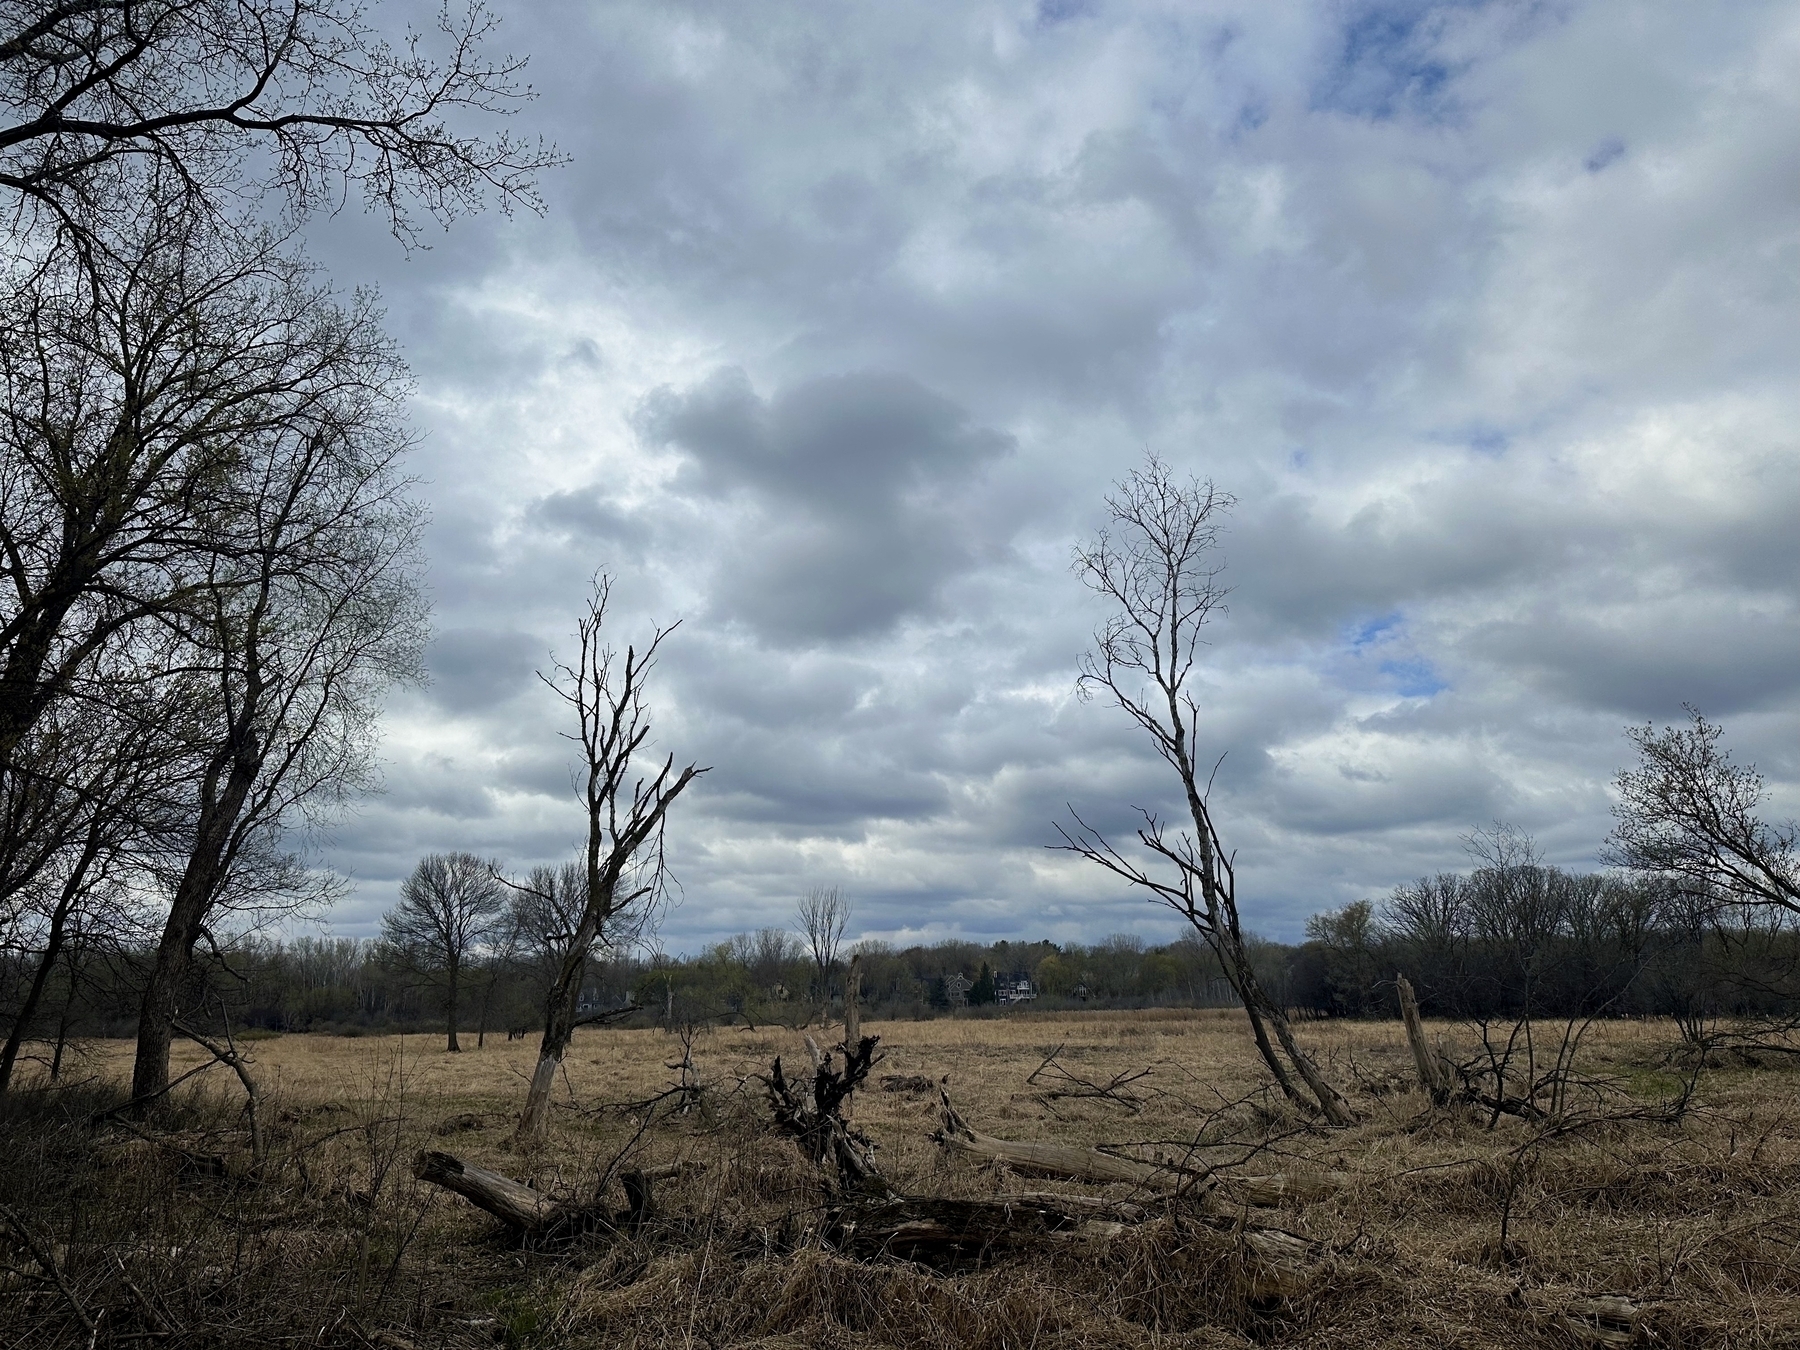 Bare trees and fallen branches dominate a dry grassland under a cloudy sky with a patch of blue peeking through.